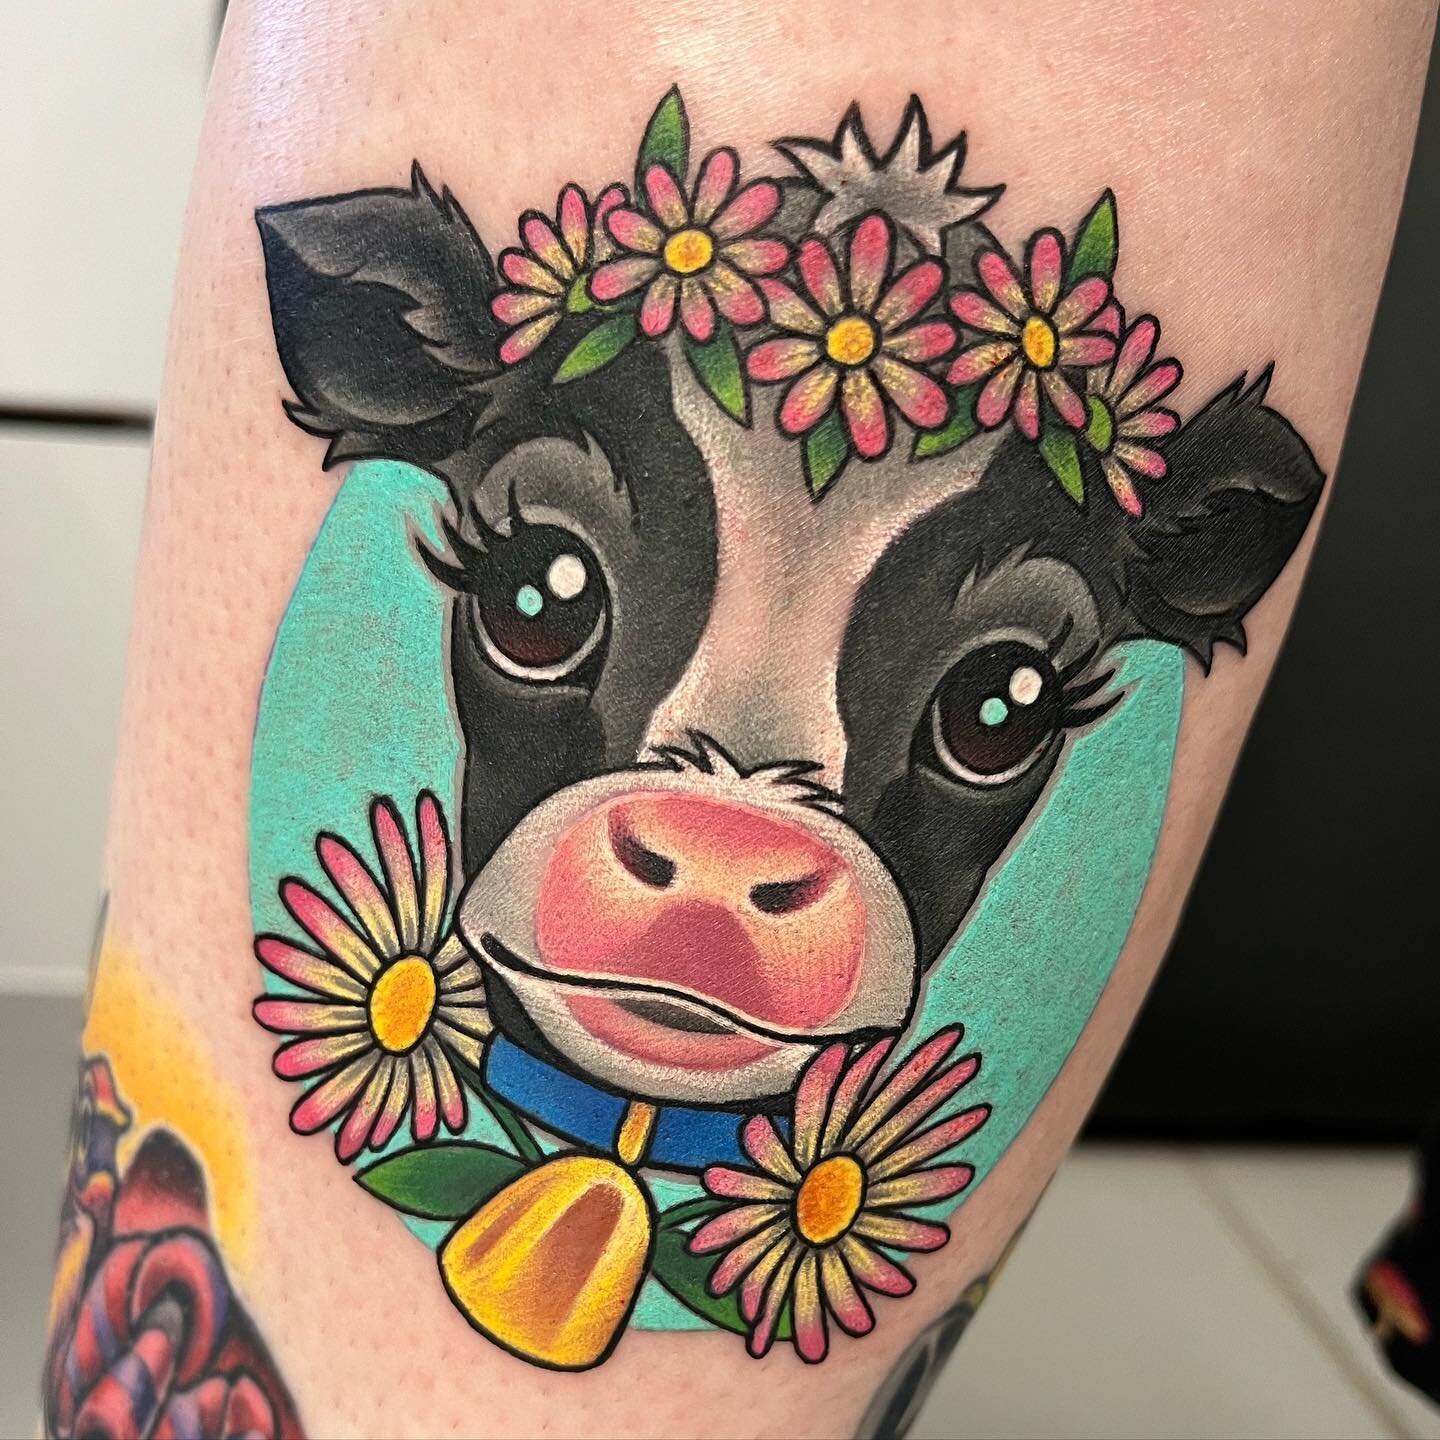 The most adorable cow! Thanks Gemma 😊
From sometime last year&hellip;

Made with the best @fusion_ink 
Supplies from @killerinktattoo
Made in Edinburgh 🏴󠁧󠁢󠁳󠁣󠁴󠁿 
(I also really like @kwadron cartridges)

Now booking June and July 2024 💫

@mic